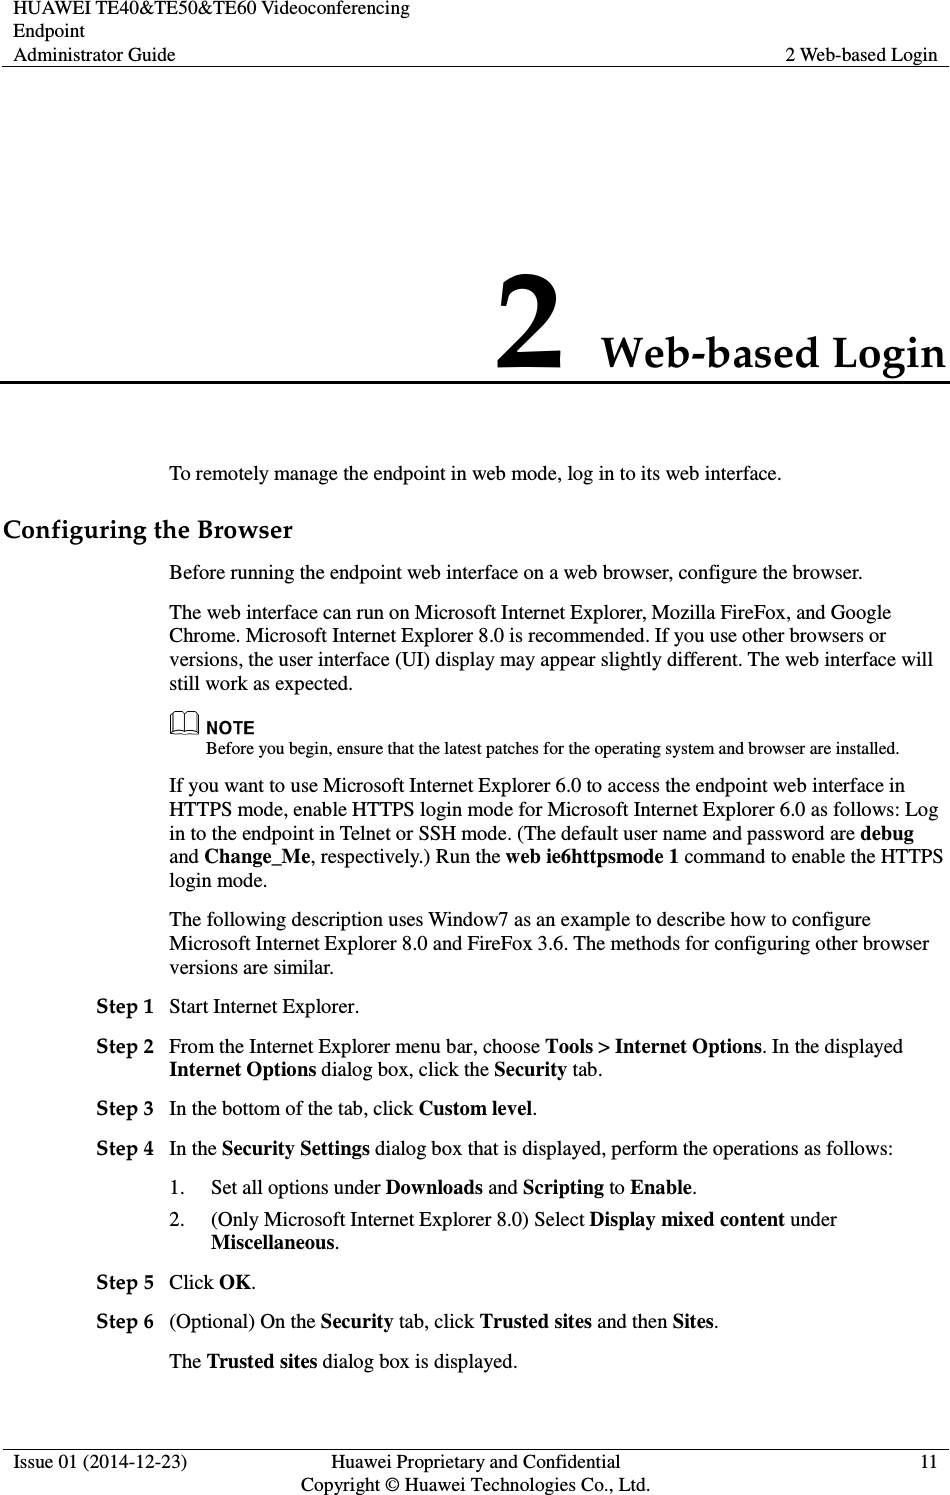 HUAWEI TE40&amp;TE50&amp;TE60 Videoconferencing Endpoint Administrator Guide  2 Web-based Login  Issue 01 (2014-12-23)  Huawei Proprietary and Confidential                                     Copyright © Huawei Technologies Co., Ltd. 11  2 Web-based Login To remotely manage the endpoint in web mode, log in to its web interface. Configuring the Browser Before running the endpoint web interface on a web browser, configure the browser. The web interface can run on Microsoft Internet Explorer, Mozilla FireFox, and Google Chrome. Microsoft Internet Explorer 8.0 is recommended. If you use other browsers or versions, the user interface (UI) display may appear slightly different. The web interface will still work as expected.  Before you begin, ensure that the latest patches for the operating system and browser are installed. If you want to use Microsoft Internet Explorer 6.0 to access the endpoint web interface in HTTPS mode, enable HTTPS login mode for Microsoft Internet Explorer 6.0 as follows: Log in to the endpoint in Telnet or SSH mode. (The default user name and password are debug and Change_Me, respectively.) Run the web ie6httpsmode 1 command to enable the HTTPS login mode.   The following description uses Window7 as an example to describe how to configure Microsoft Internet Explorer 8.0 and FireFox 3.6. The methods for configuring other browser versions are similar. Step 1 Start Internet Explorer. Step 2 From the Internet Explorer menu bar, choose Tools &gt; Internet Options. In the displayed Internet Options dialog box, click the Security tab. Step 3 In the bottom of the tab, click Custom level.   Step 4 In the Security Settings dialog box that is displayed, perform the operations as follows:   1. Set all options under Downloads and Scripting to Enable. 2. (Only Microsoft Internet Explorer 8.0) Select Display mixed content under Miscellaneous. Step 5 Click OK. Step 6 (Optional) On the Security tab, click Trusted sites and then Sites. The Trusted sites dialog box is displayed. 